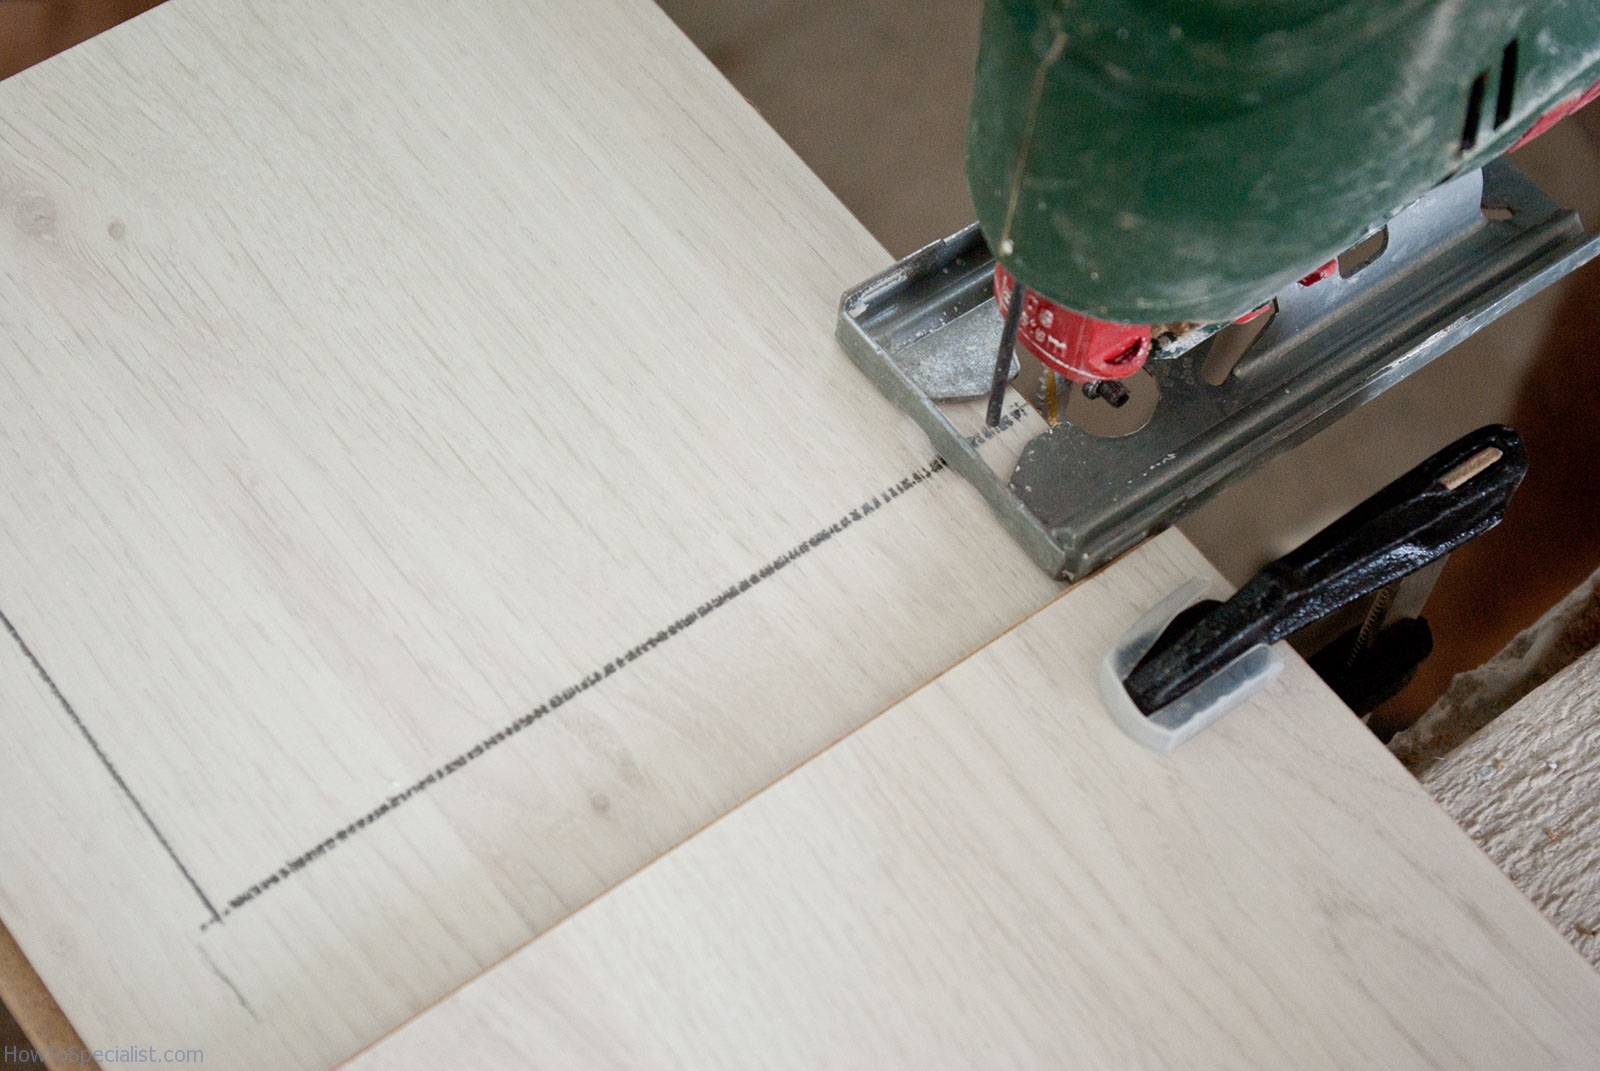 How To Cut Laminate Flooring, Type Of Saw To Cut Laminate Flooring